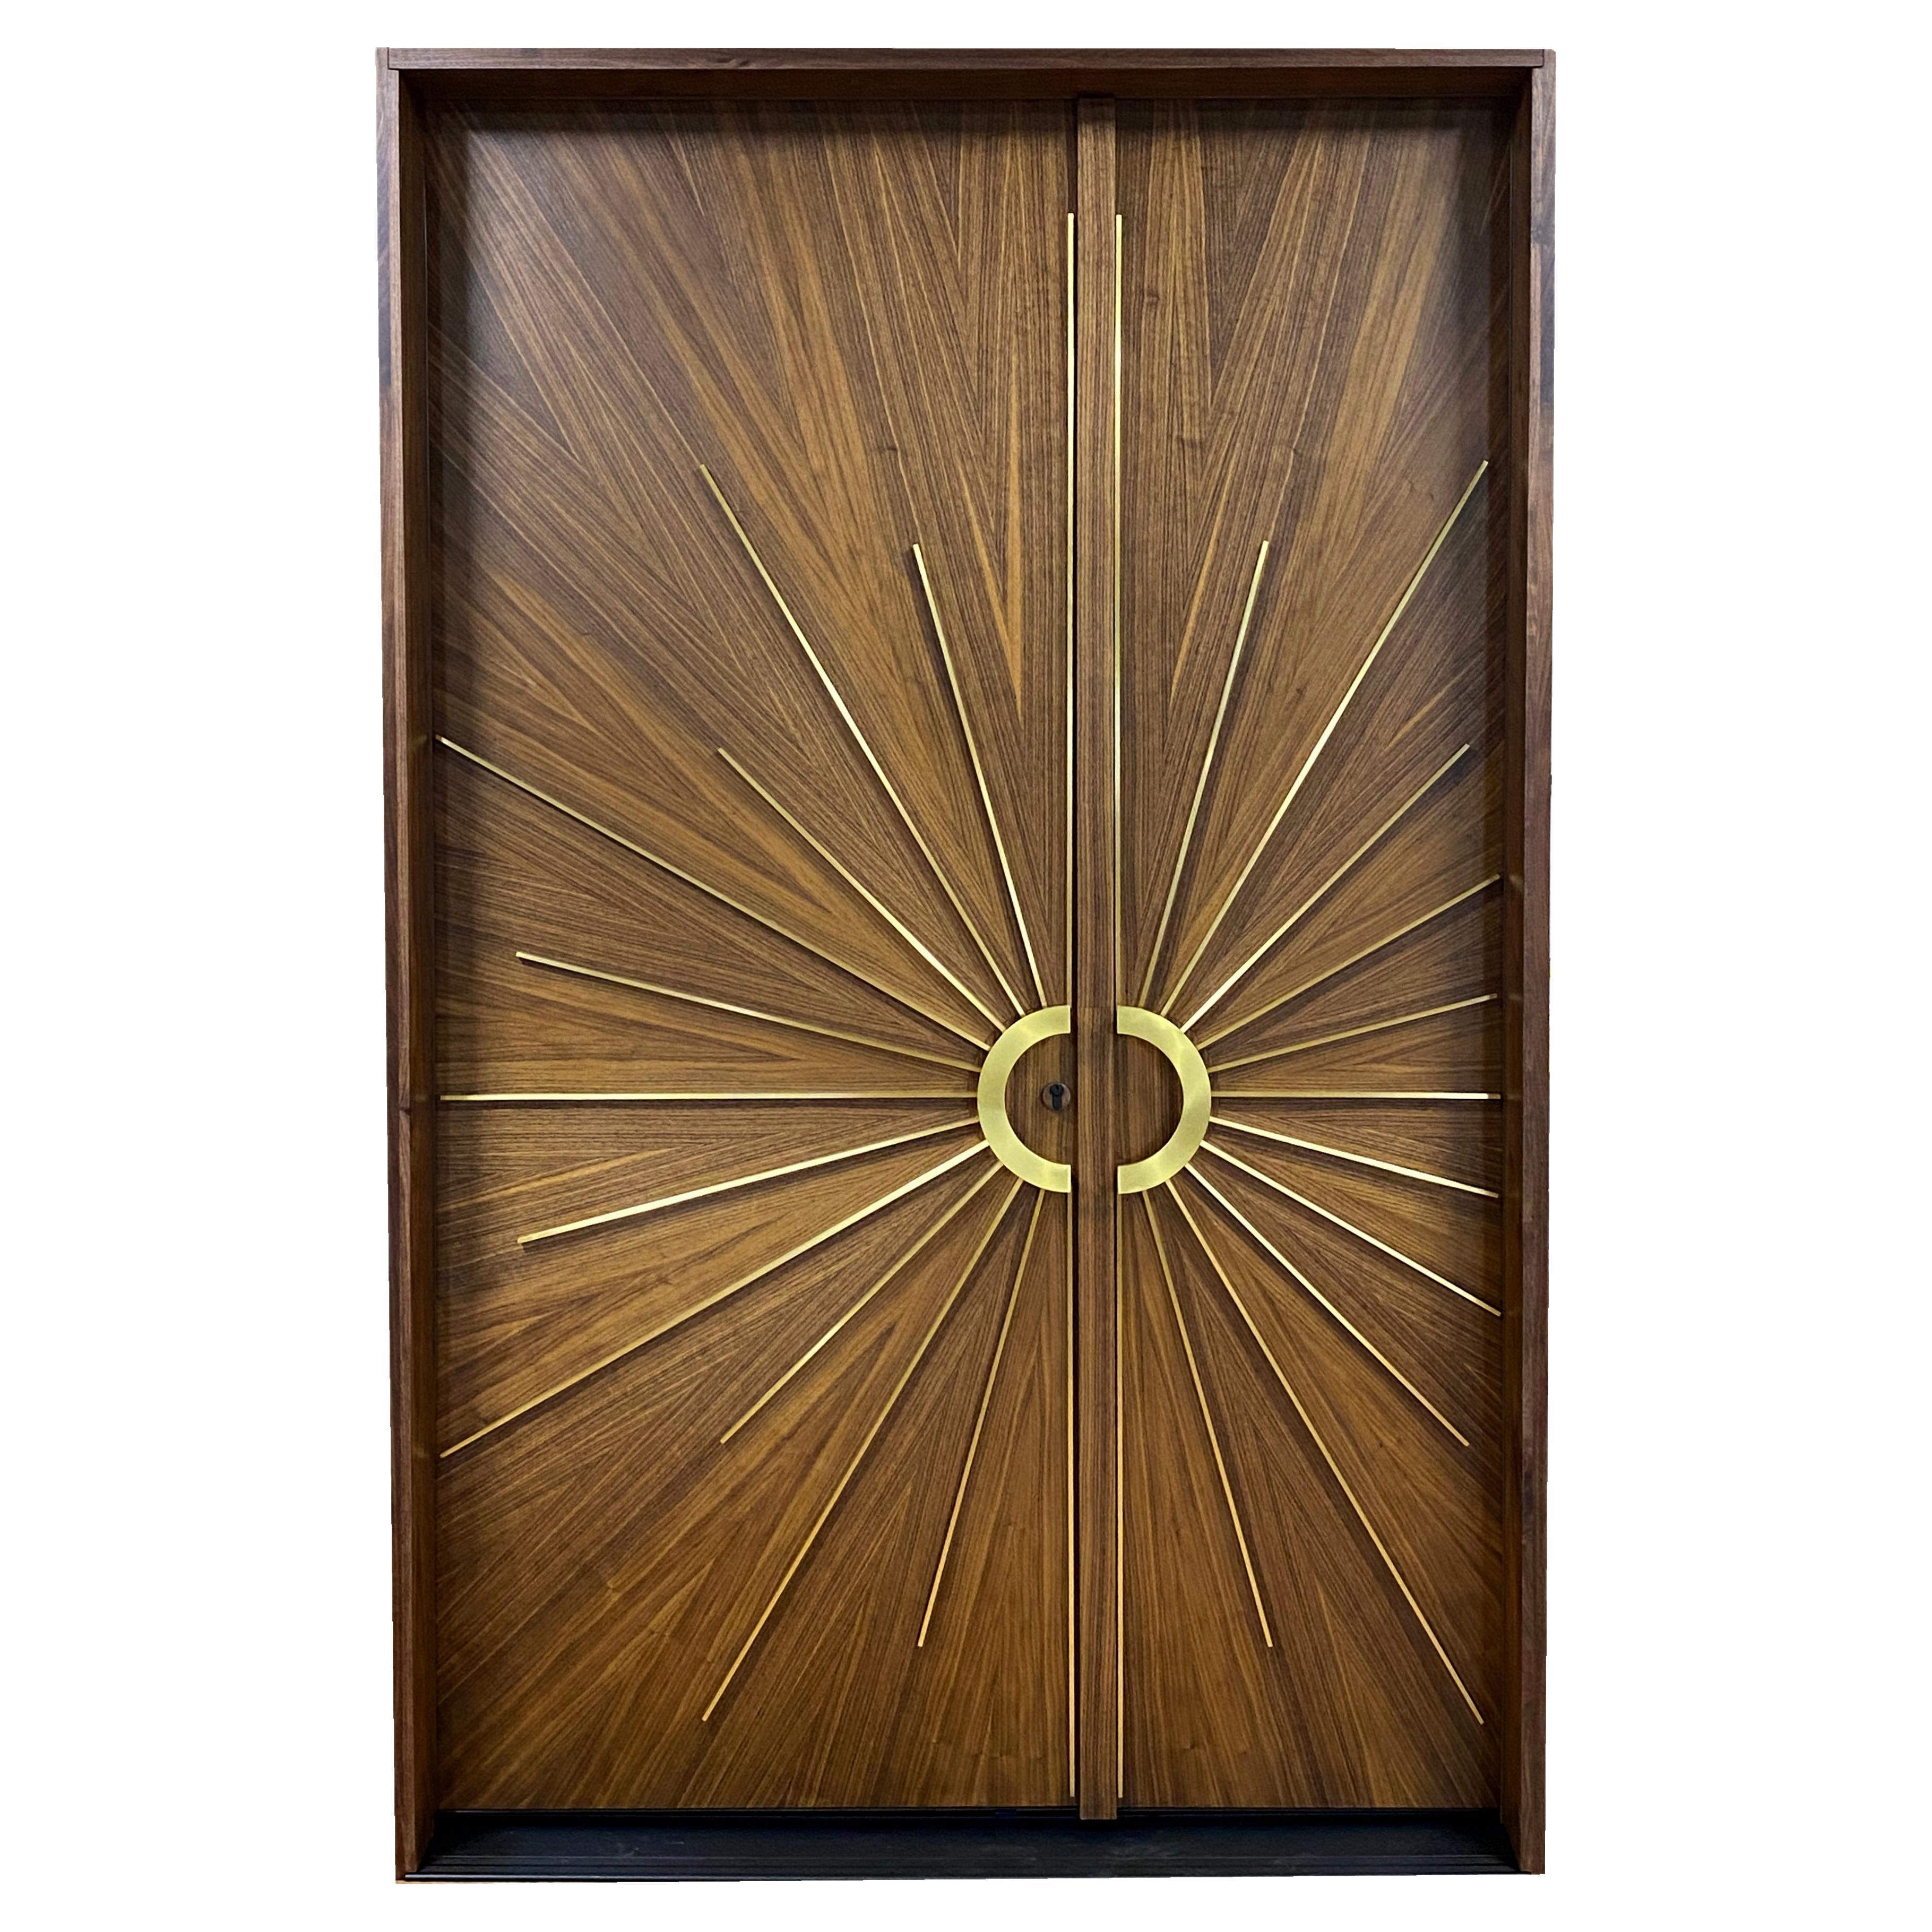 Model HNRWEDA Radial walnut and starburst.
Made to order by History Never Repeats LLC. Designed by Aaron Saxton & Maria Armada. Custom produced double doors for 60